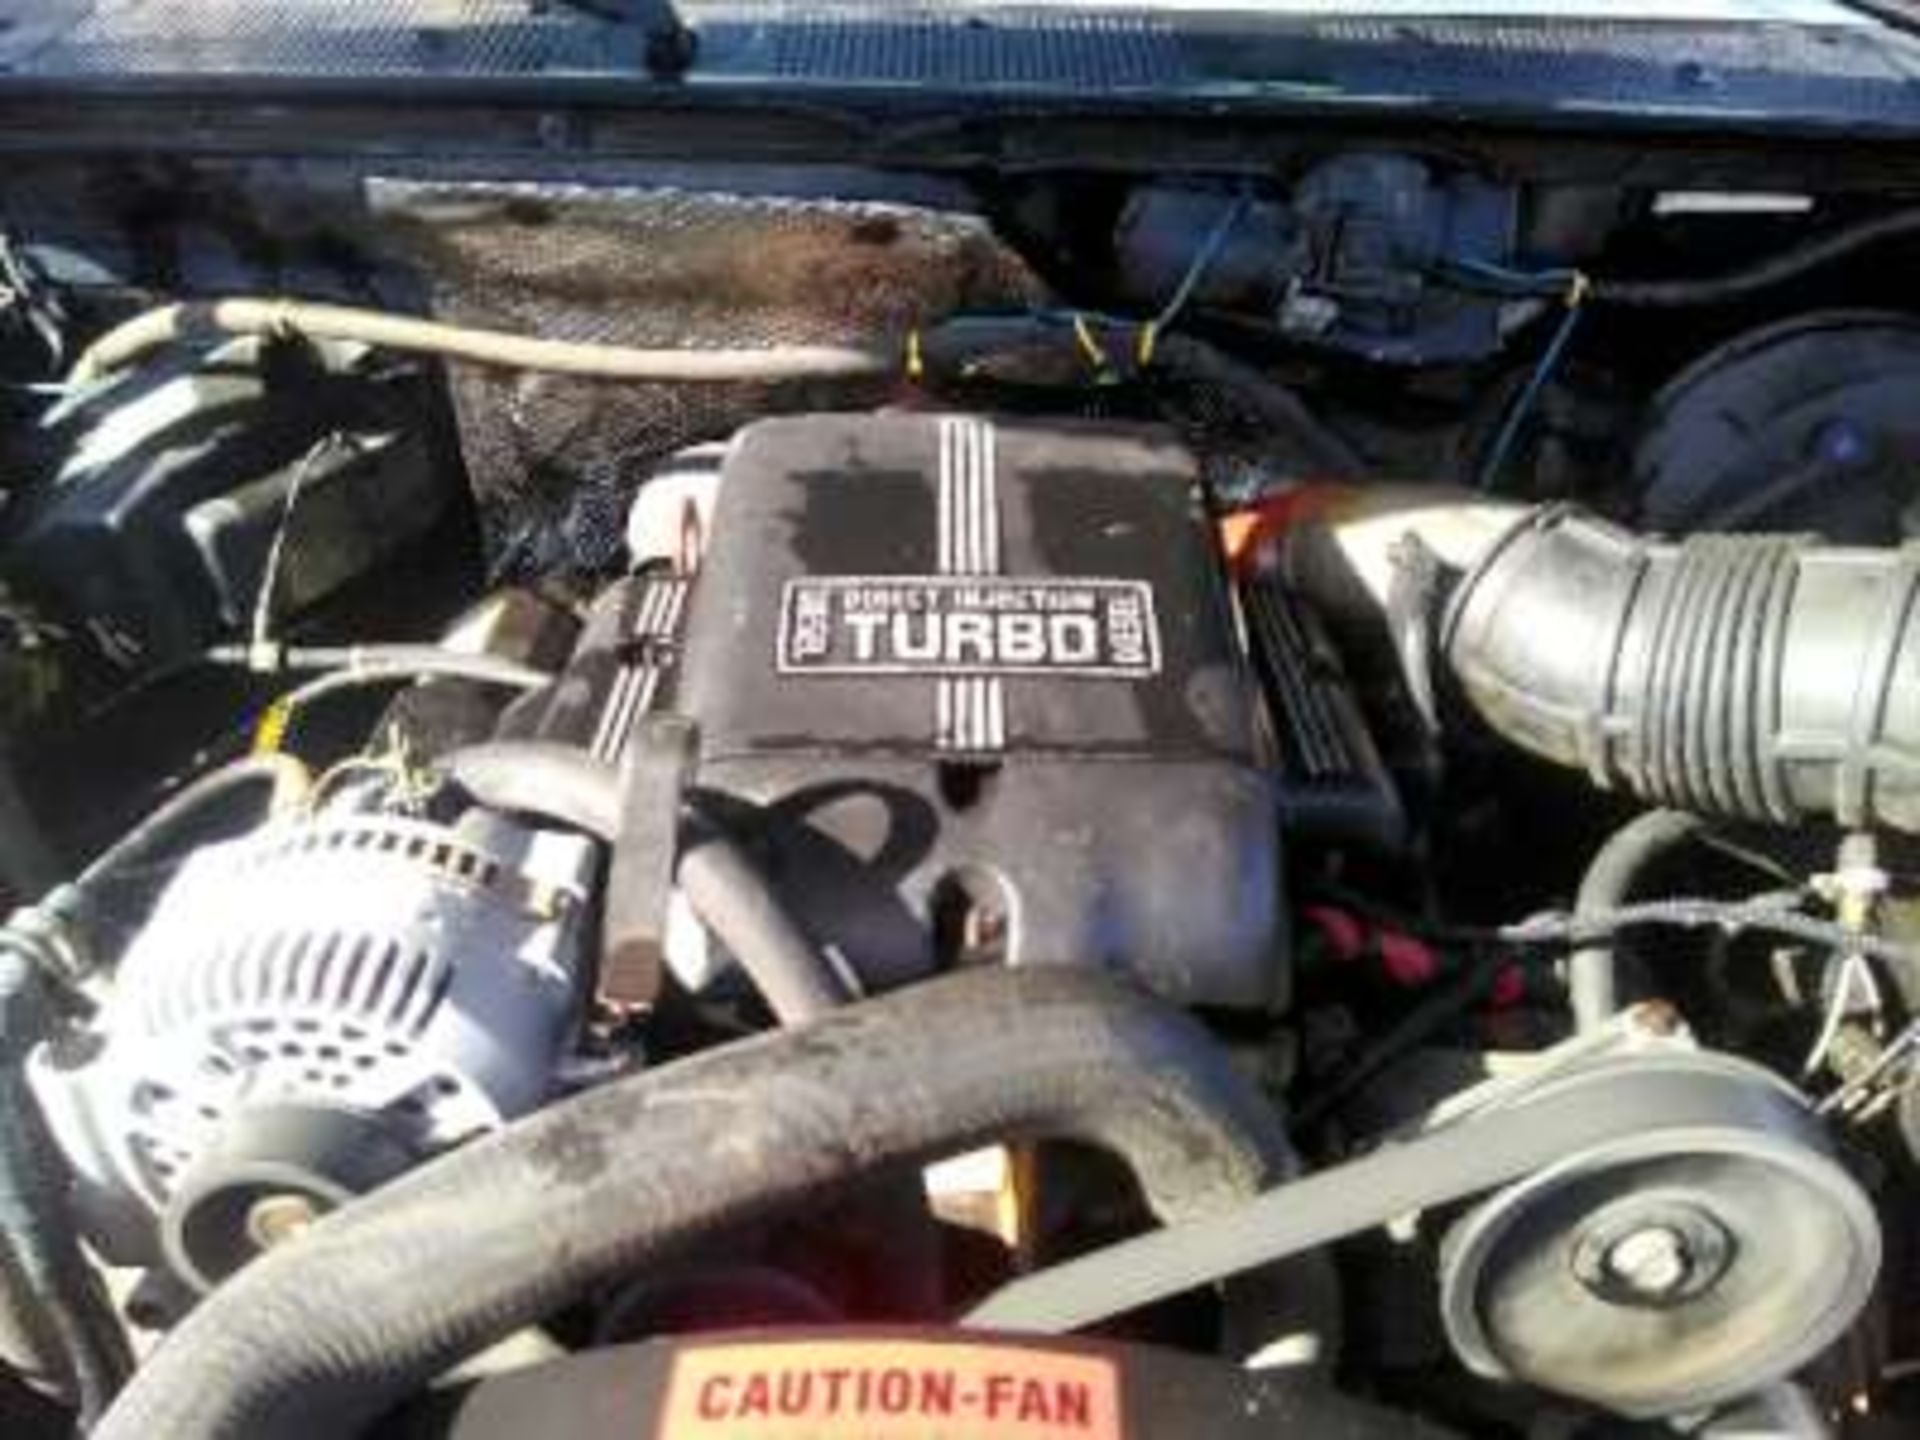 1994 F350 Turbo Dsl Truck w/flat deck, 238106kms (previously registered in Sask) - Image 4 of 5